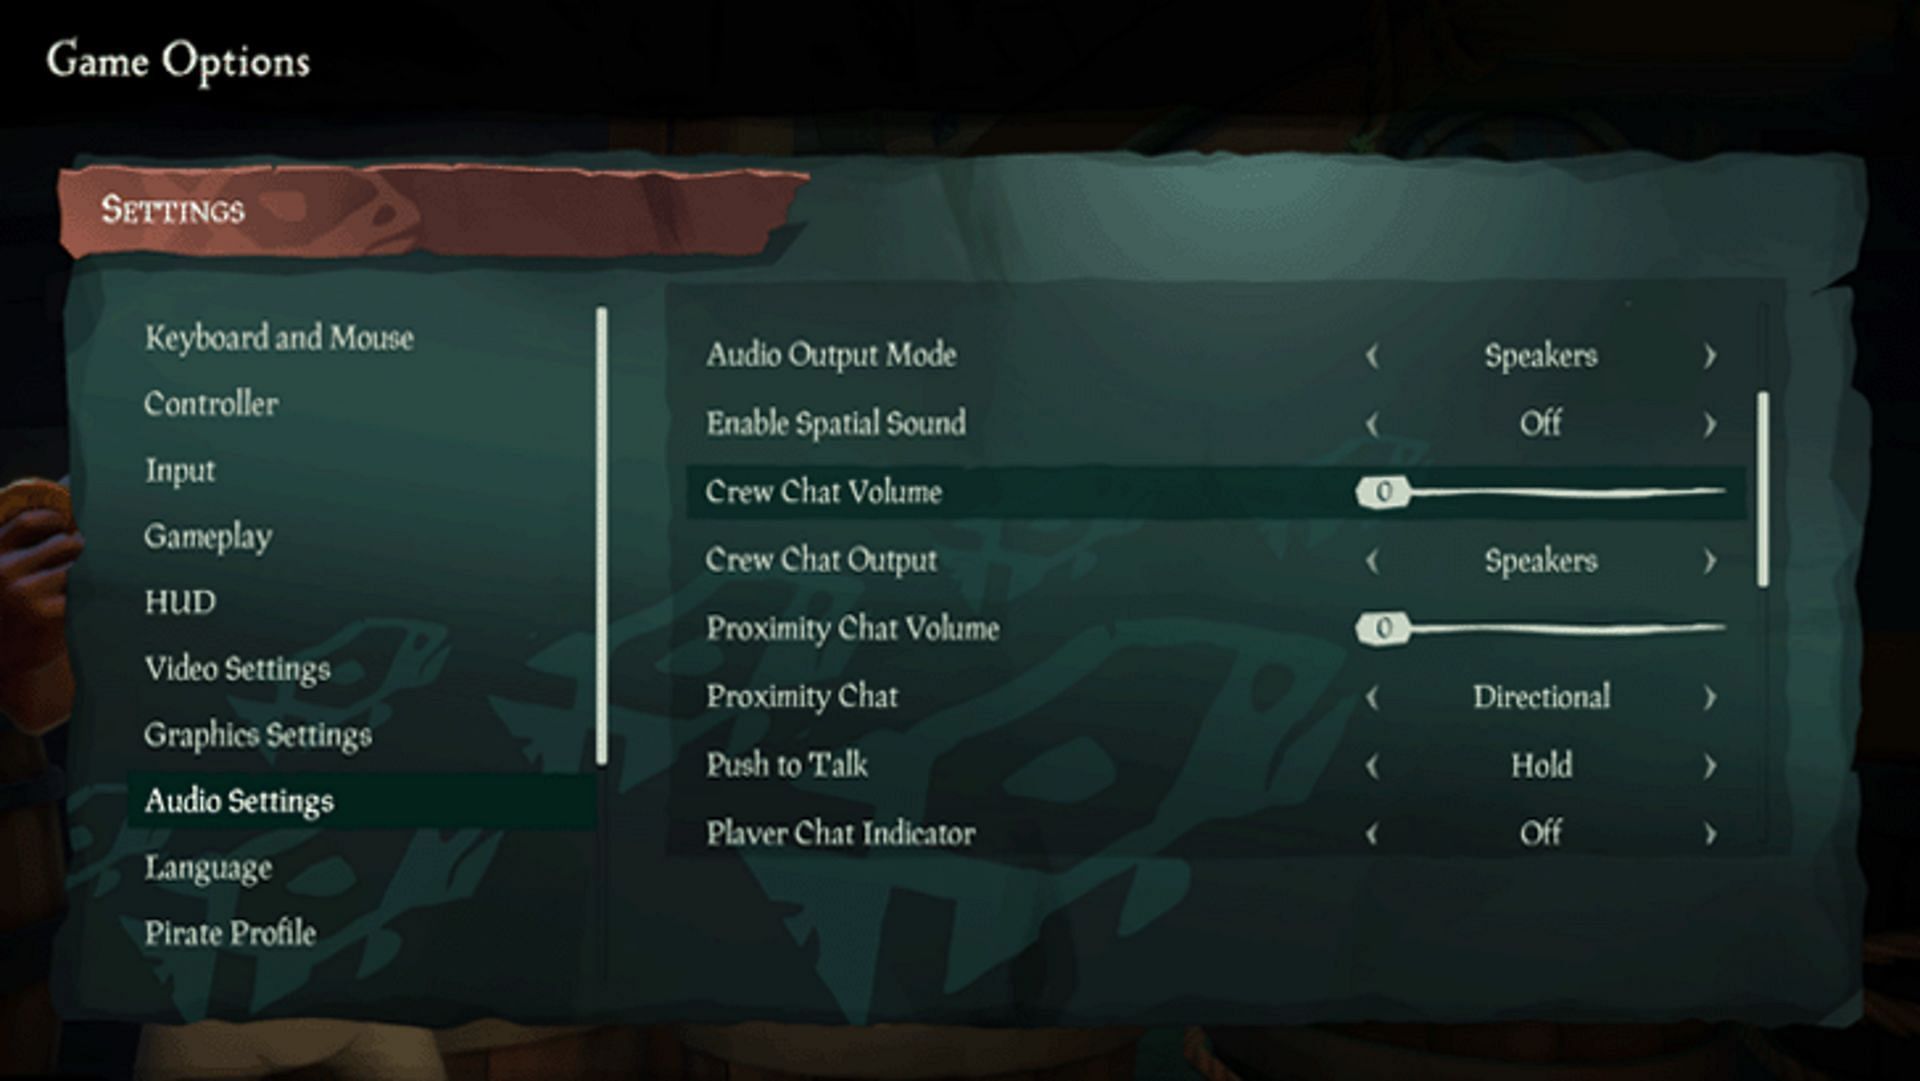 You can turn off Crew Chat (Image via Rarre)